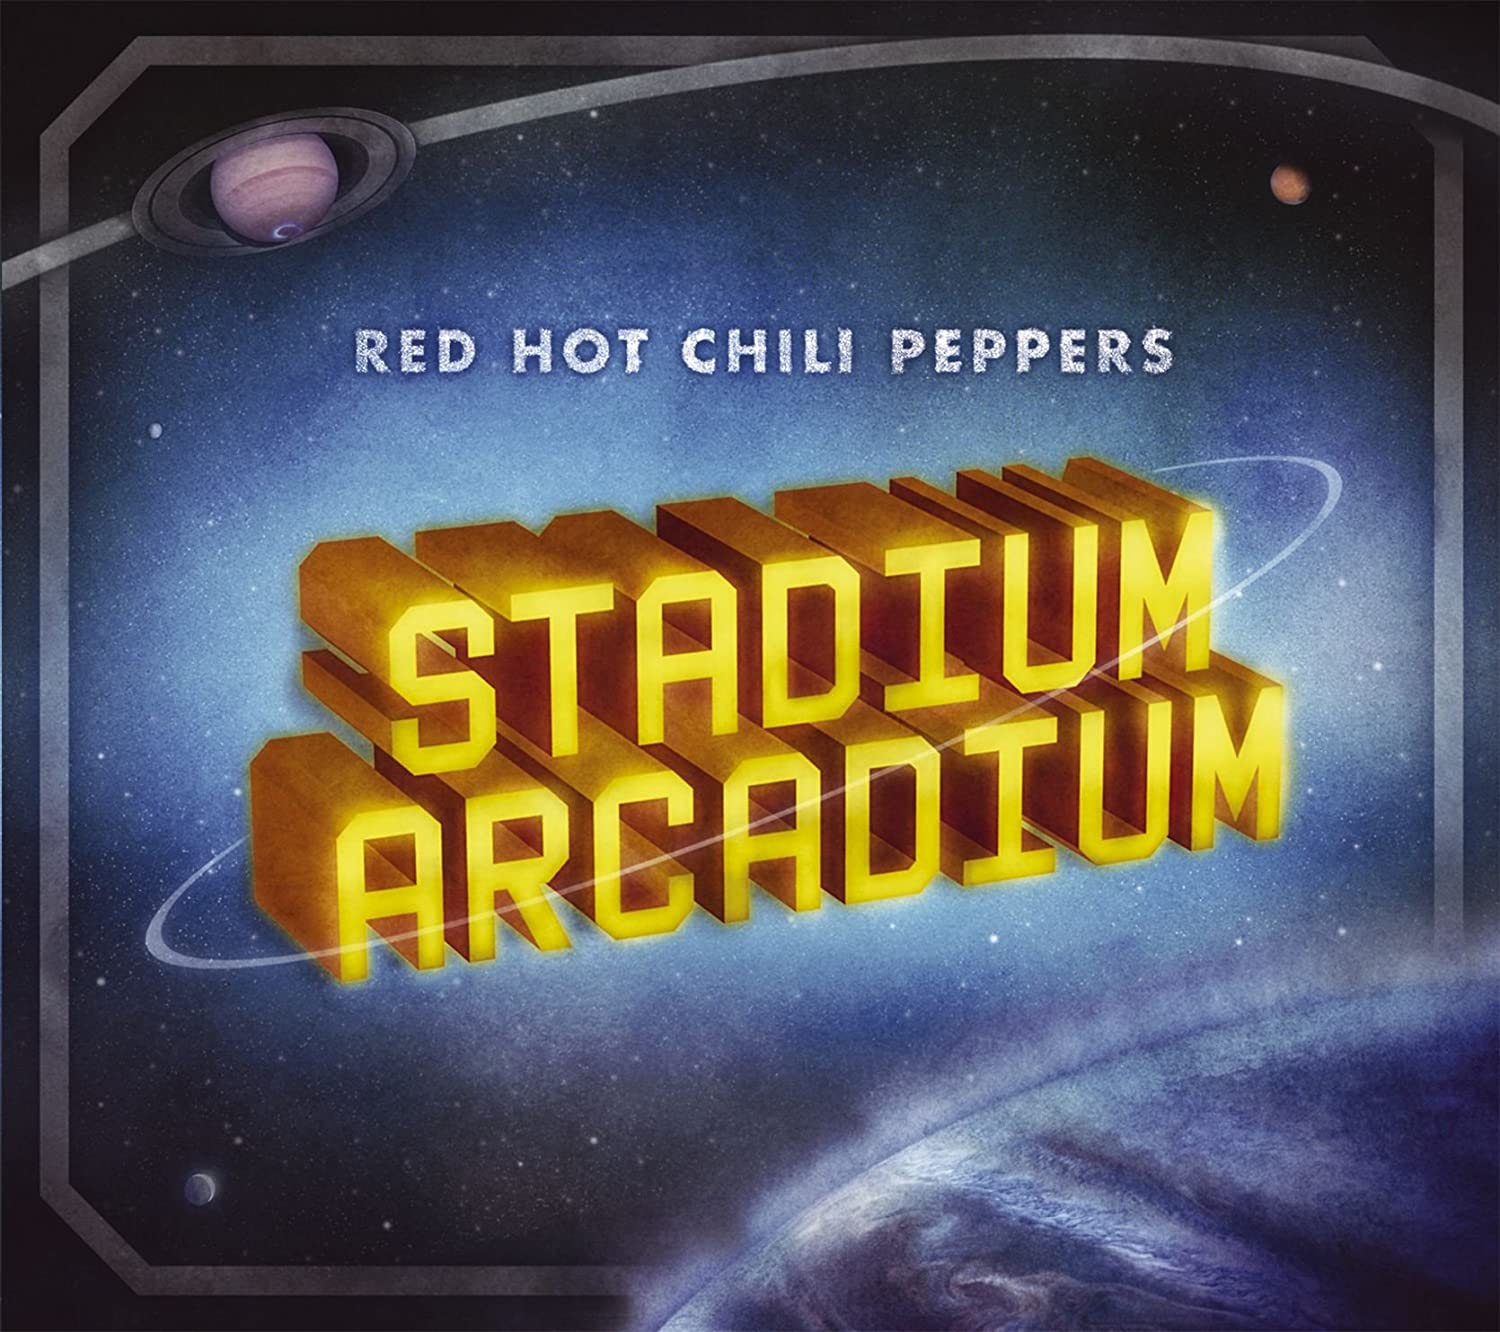 Pas på lidelse Forbindelse Red Hot Chili Peppers on Twitter: "On this day in 2006, Stadium Arcadium  was released! Produced by Rick Rubin. What's your favorite song on the  album? Listen here 🔊 https://t.co/pQ41yxUIqB #RHCP #StadiumArcadium